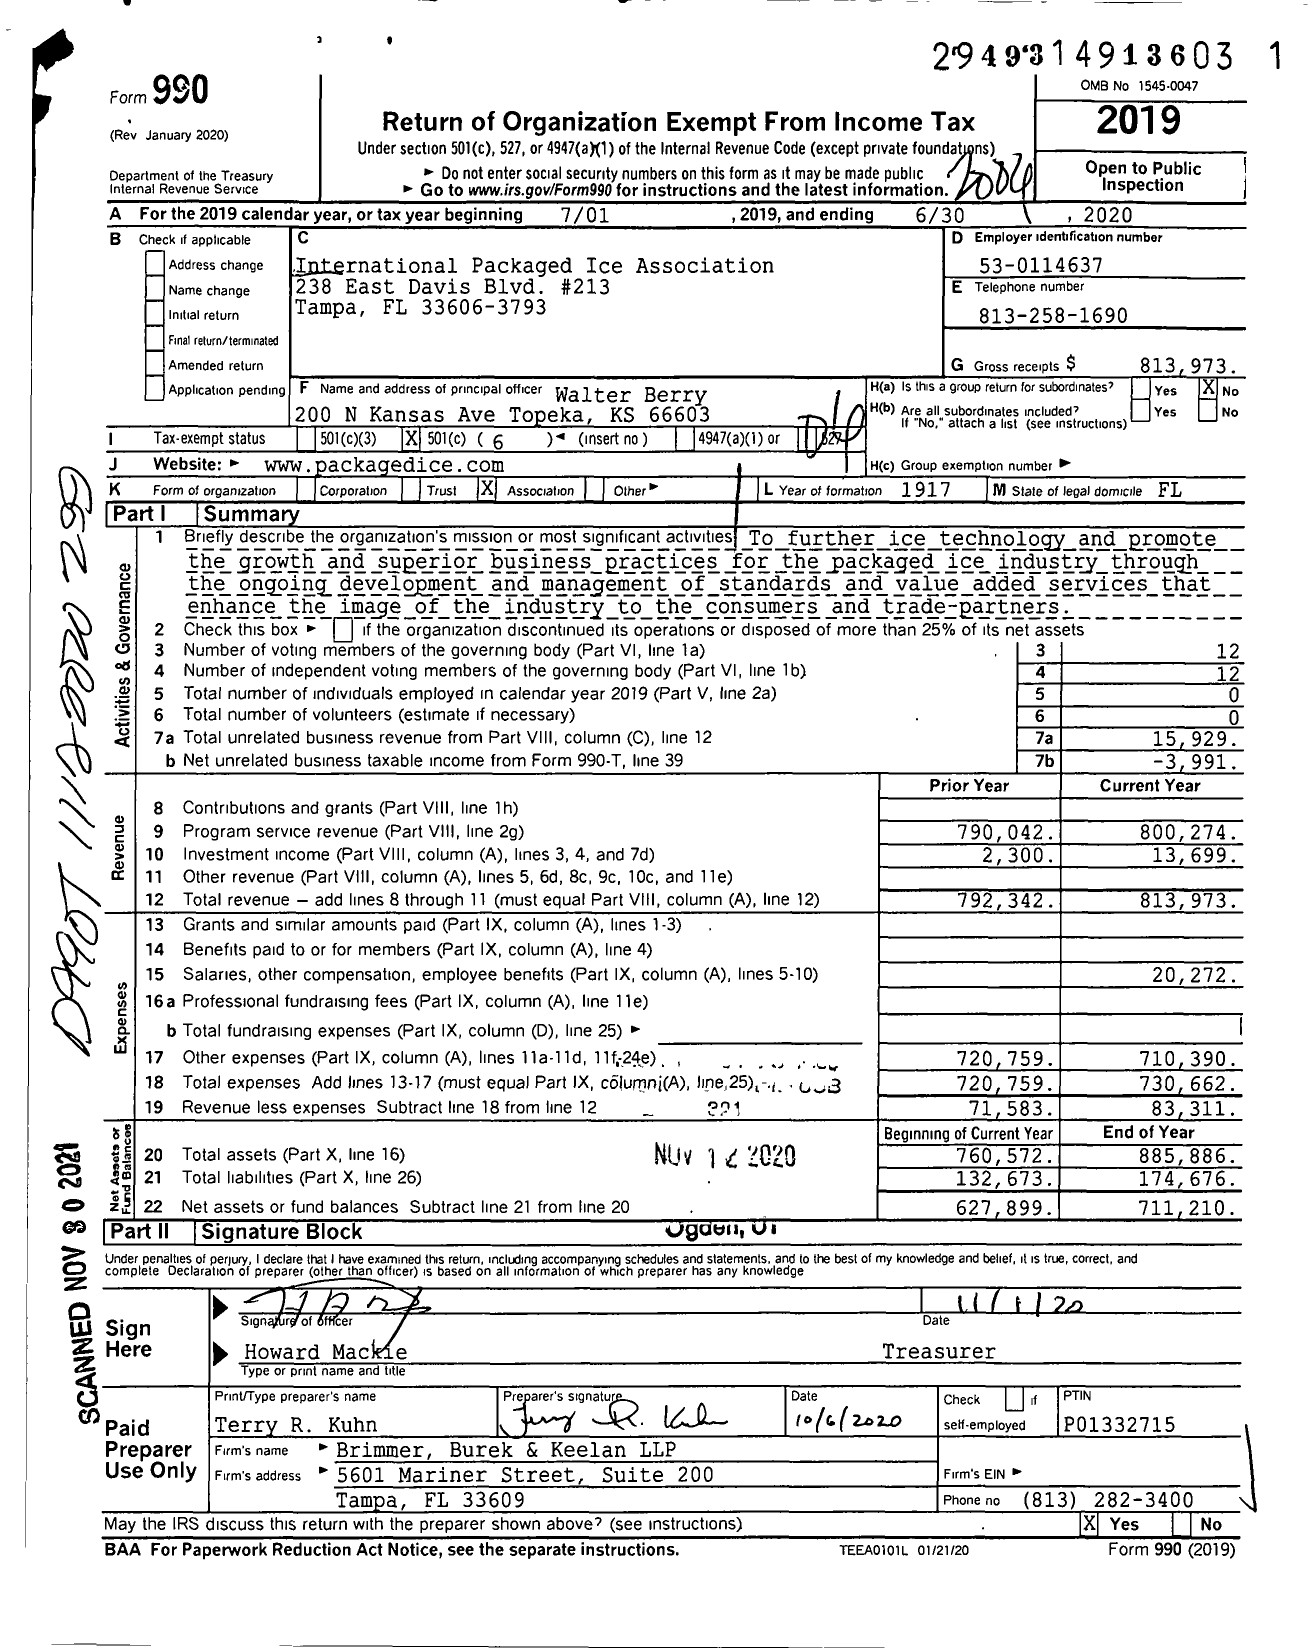 Image of first page of 2019 Form 990O for International Packaged Ice Association